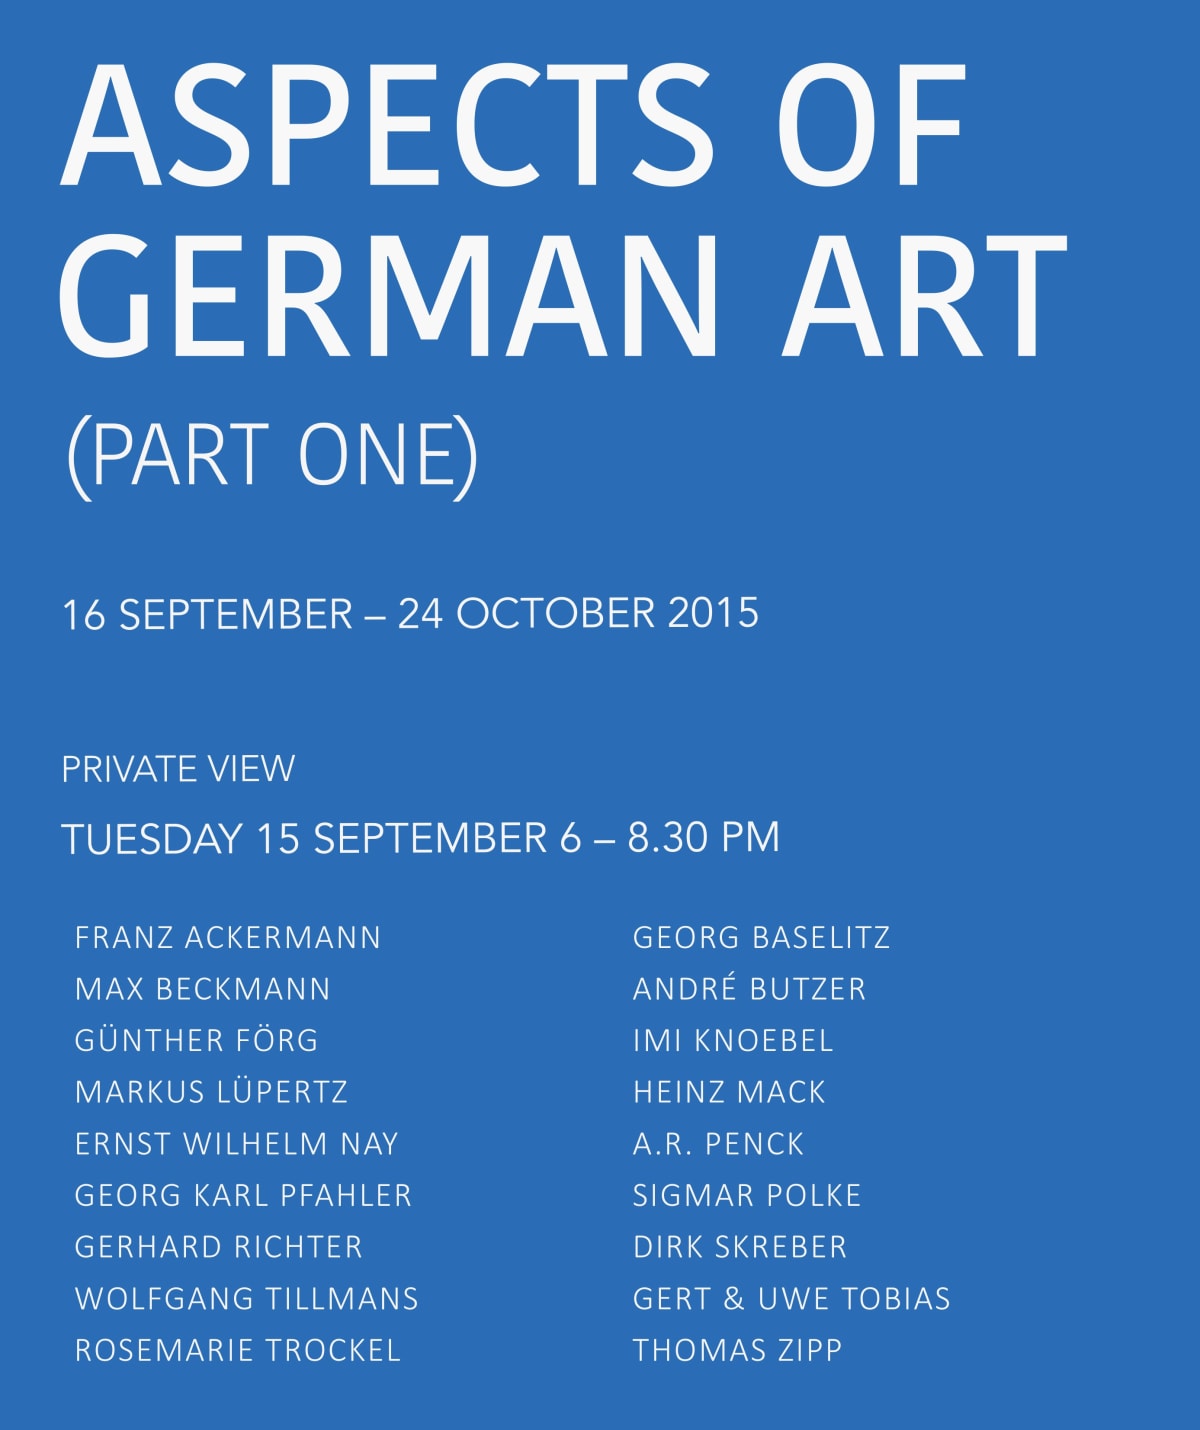 Aspects of German Art (Part One)